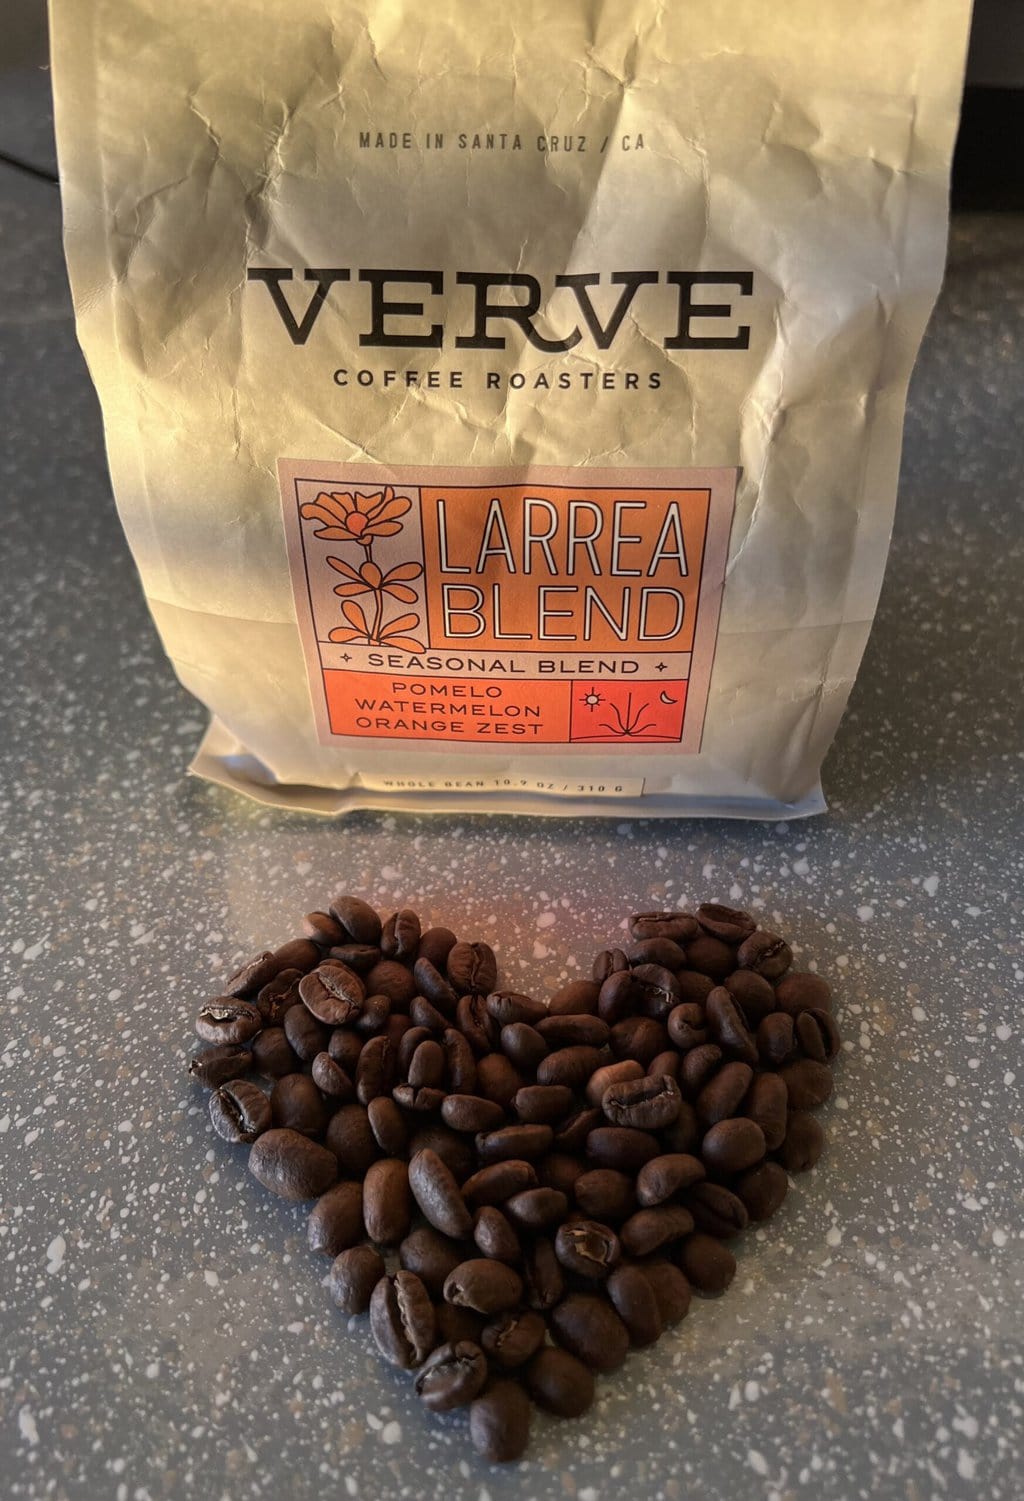 Coffee beans are arranged in a heart shape on a tabletop against the backdrop of Verve Coffee packaging